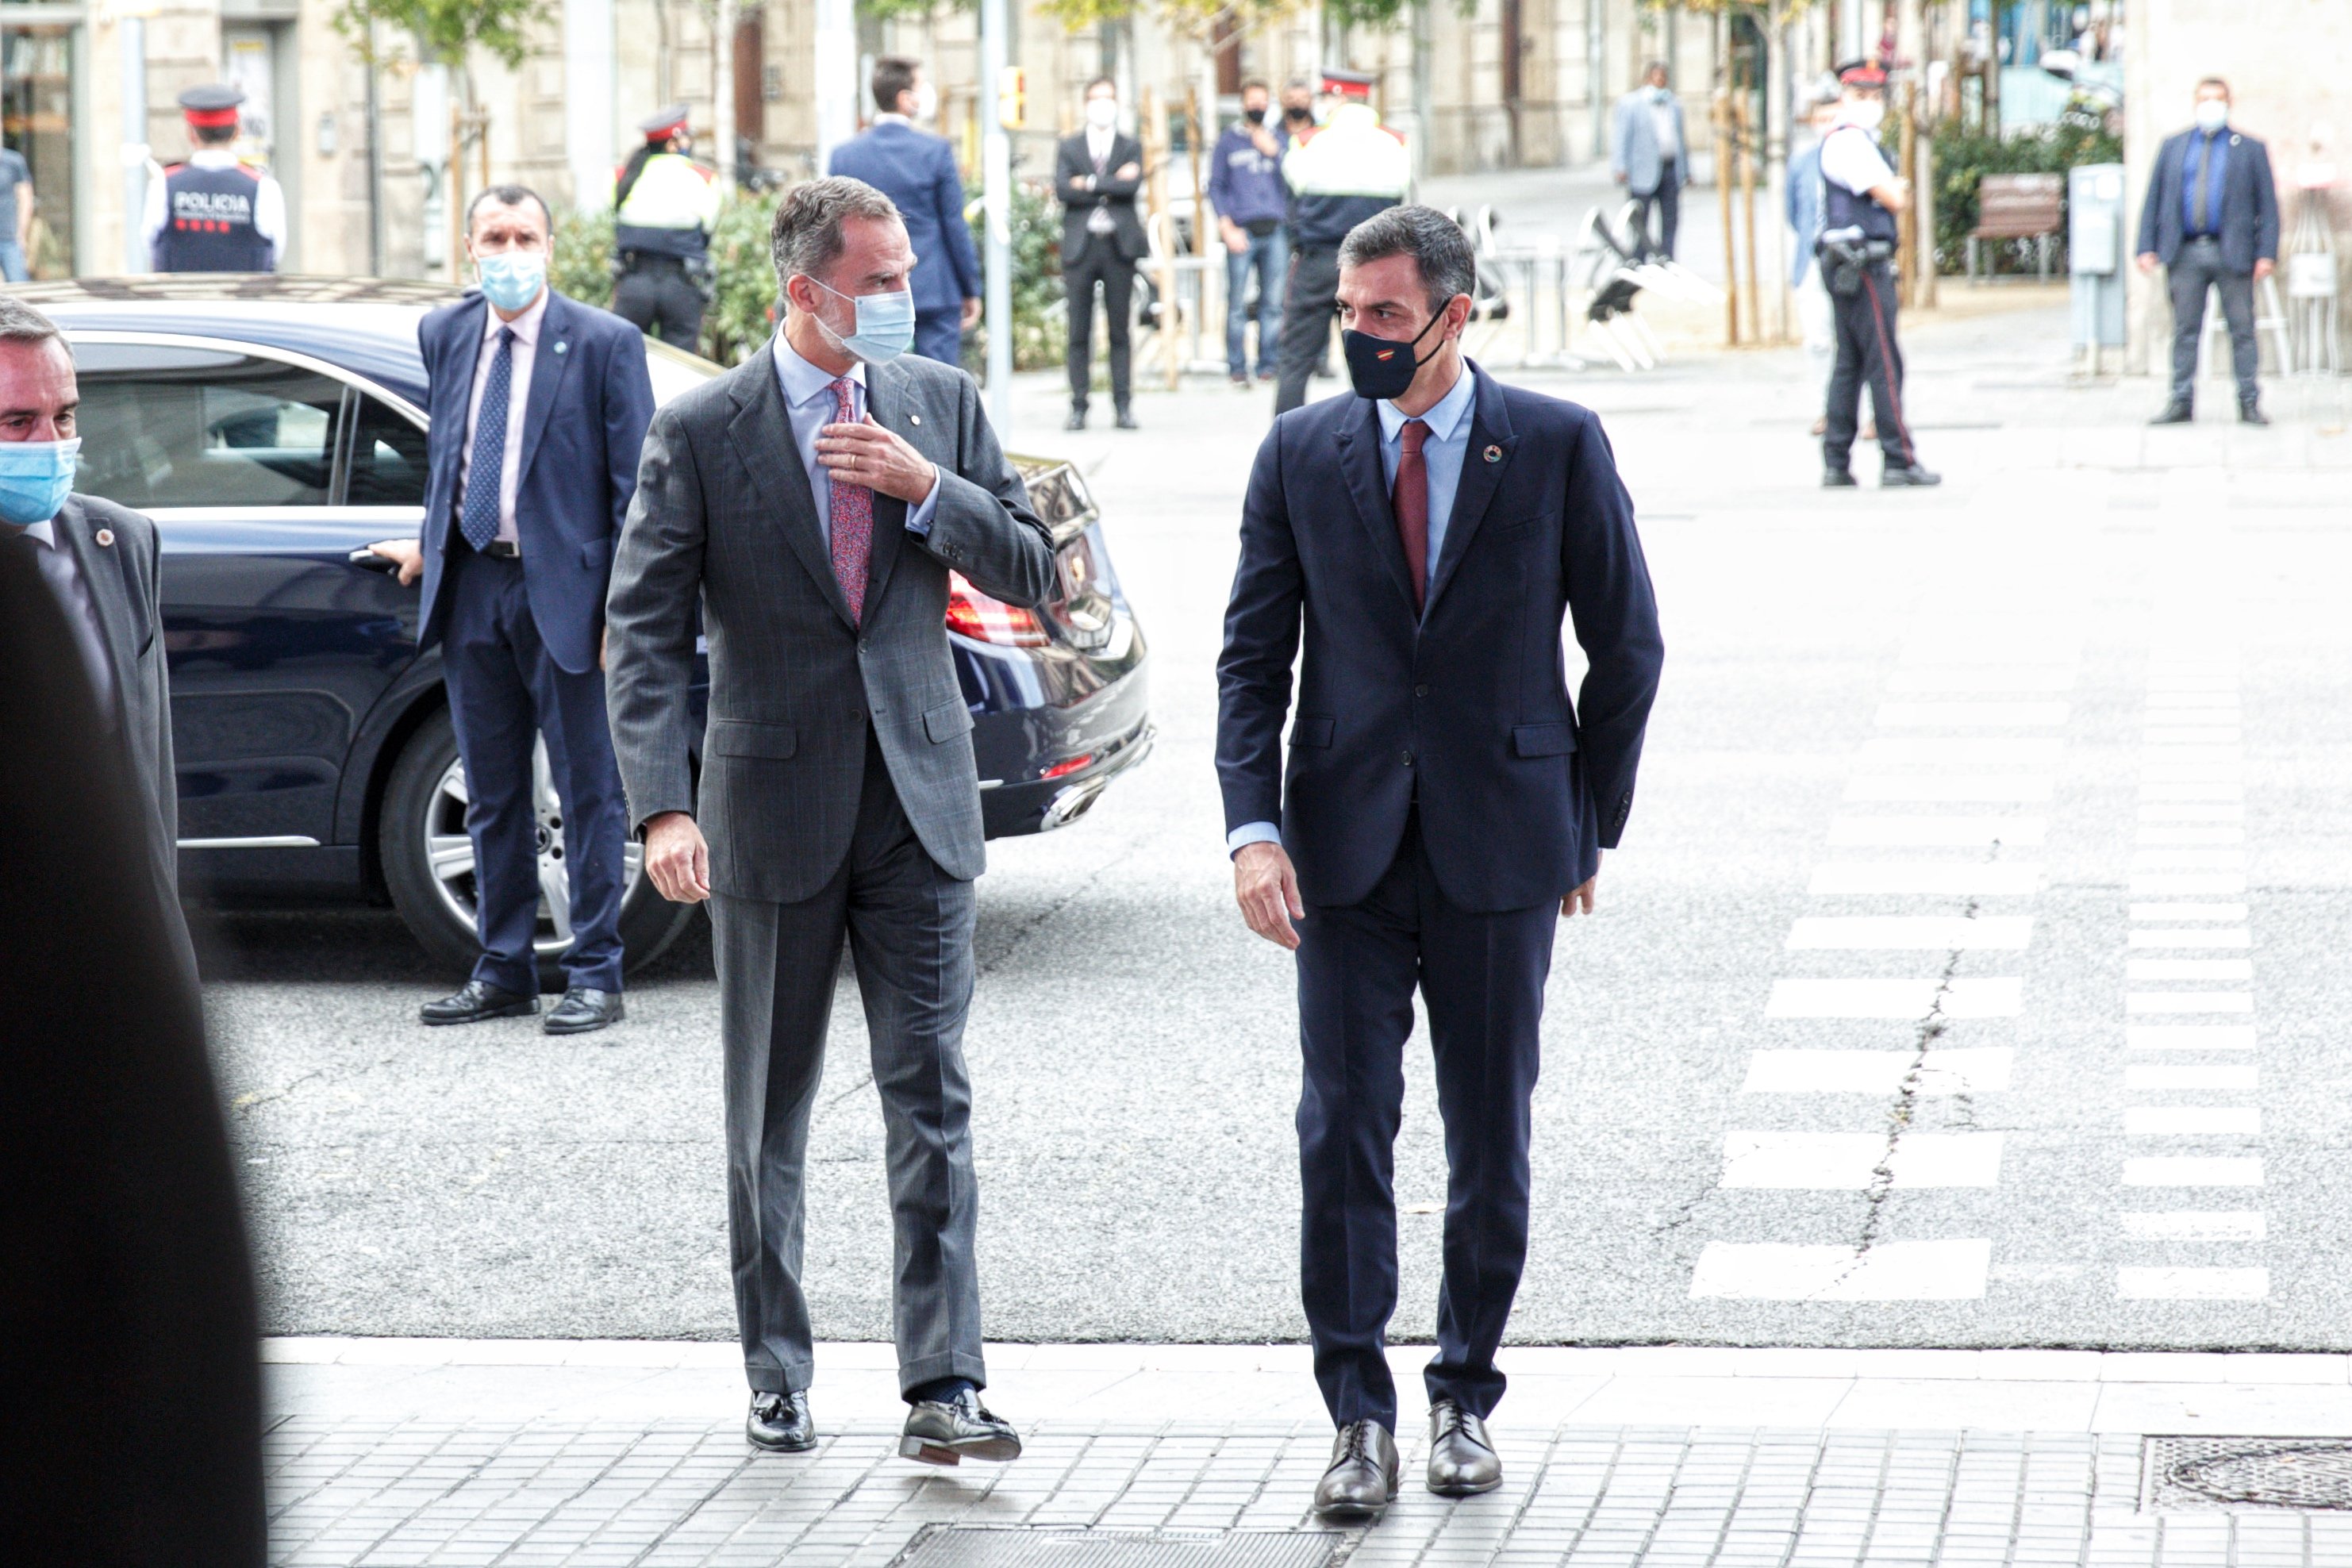 Felipe VI calls for "image of unity" in Barcelona, locked down against protests